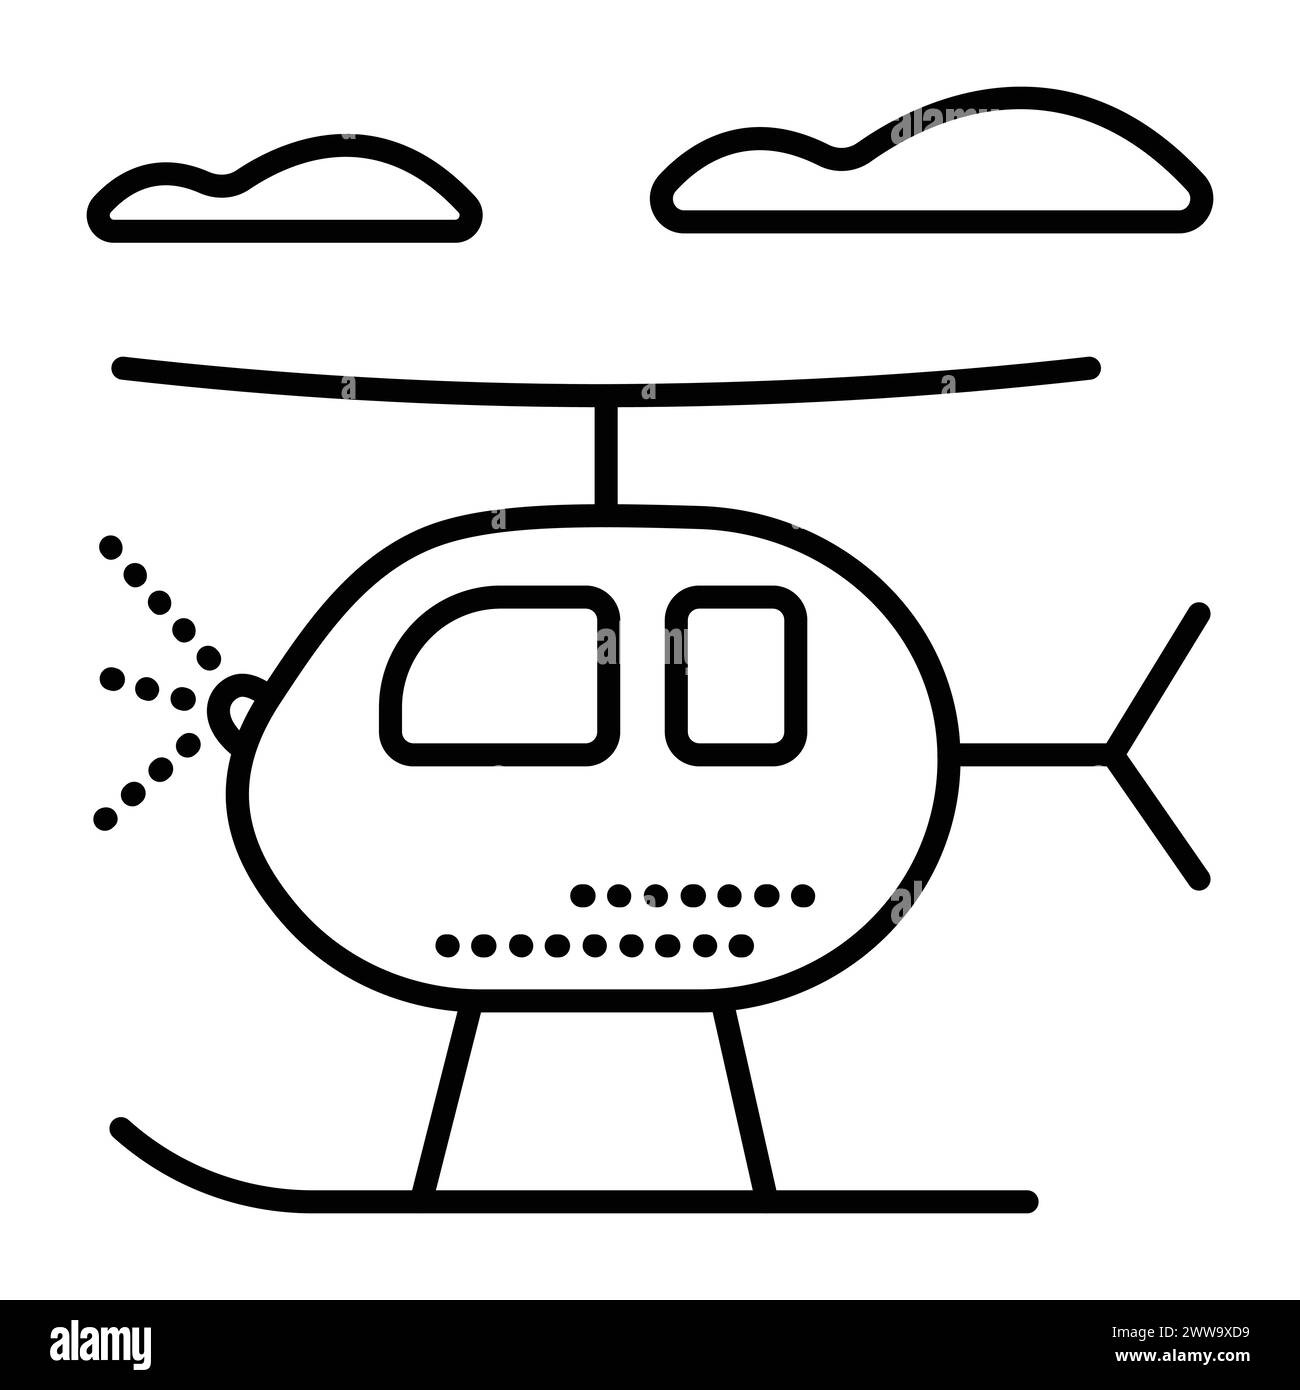 Single helicopter with skids, black line vector icon, clouds and copter pictogram, cute western chopper with a landing gear, air taxi minimal illustra Stock Vector